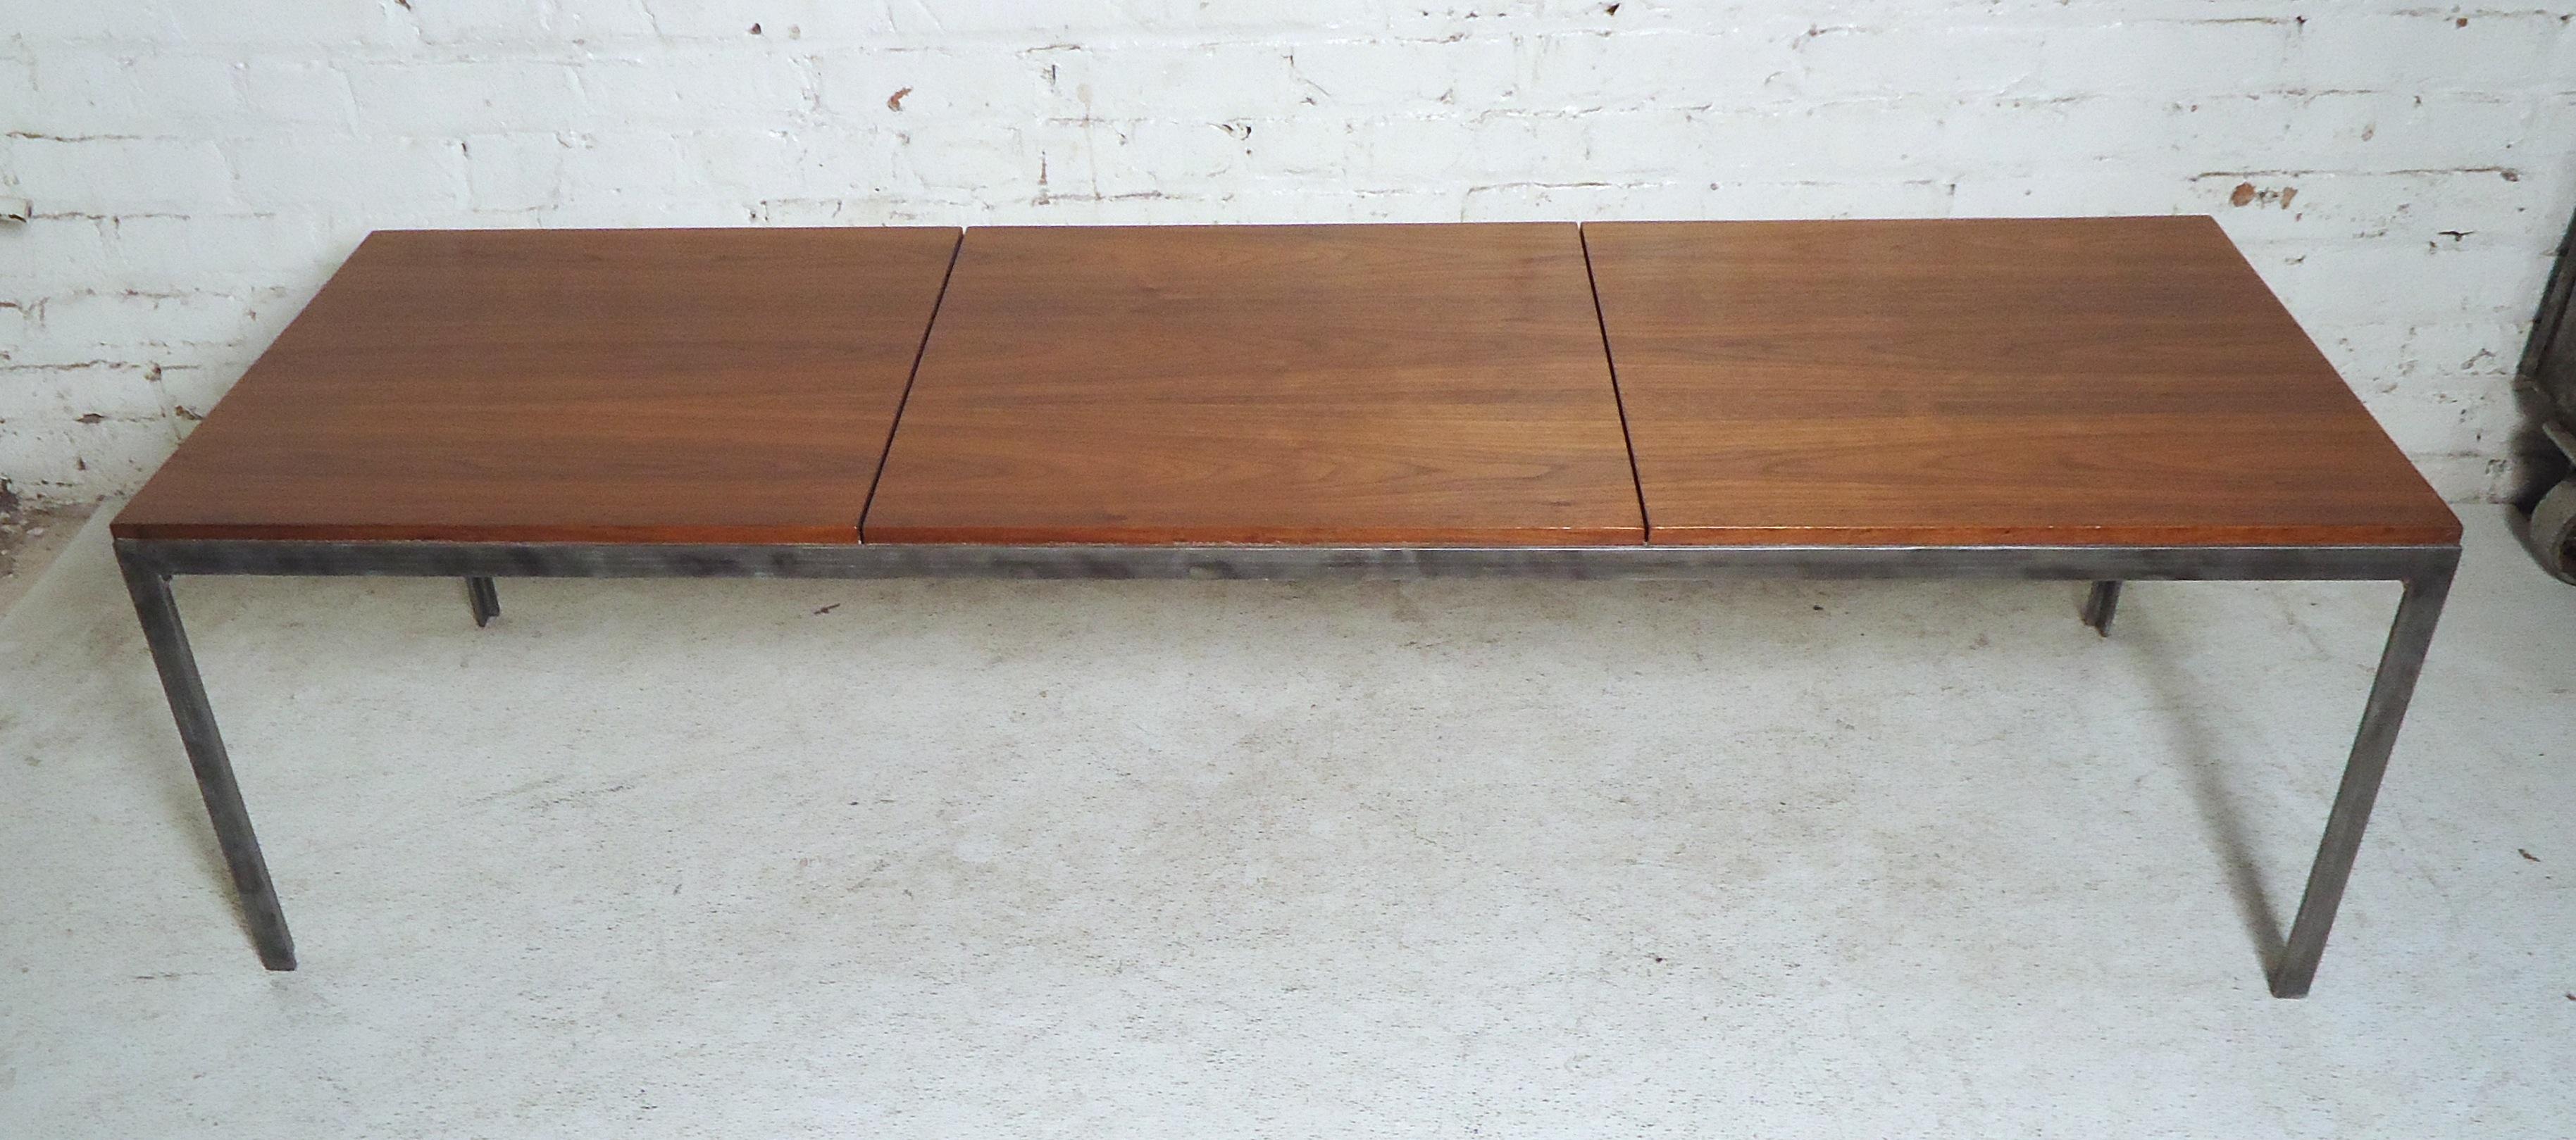 Exquisite Mid-Century Modern Coffee Table by Florence Knoll In Good Condition For Sale In Brooklyn, NY